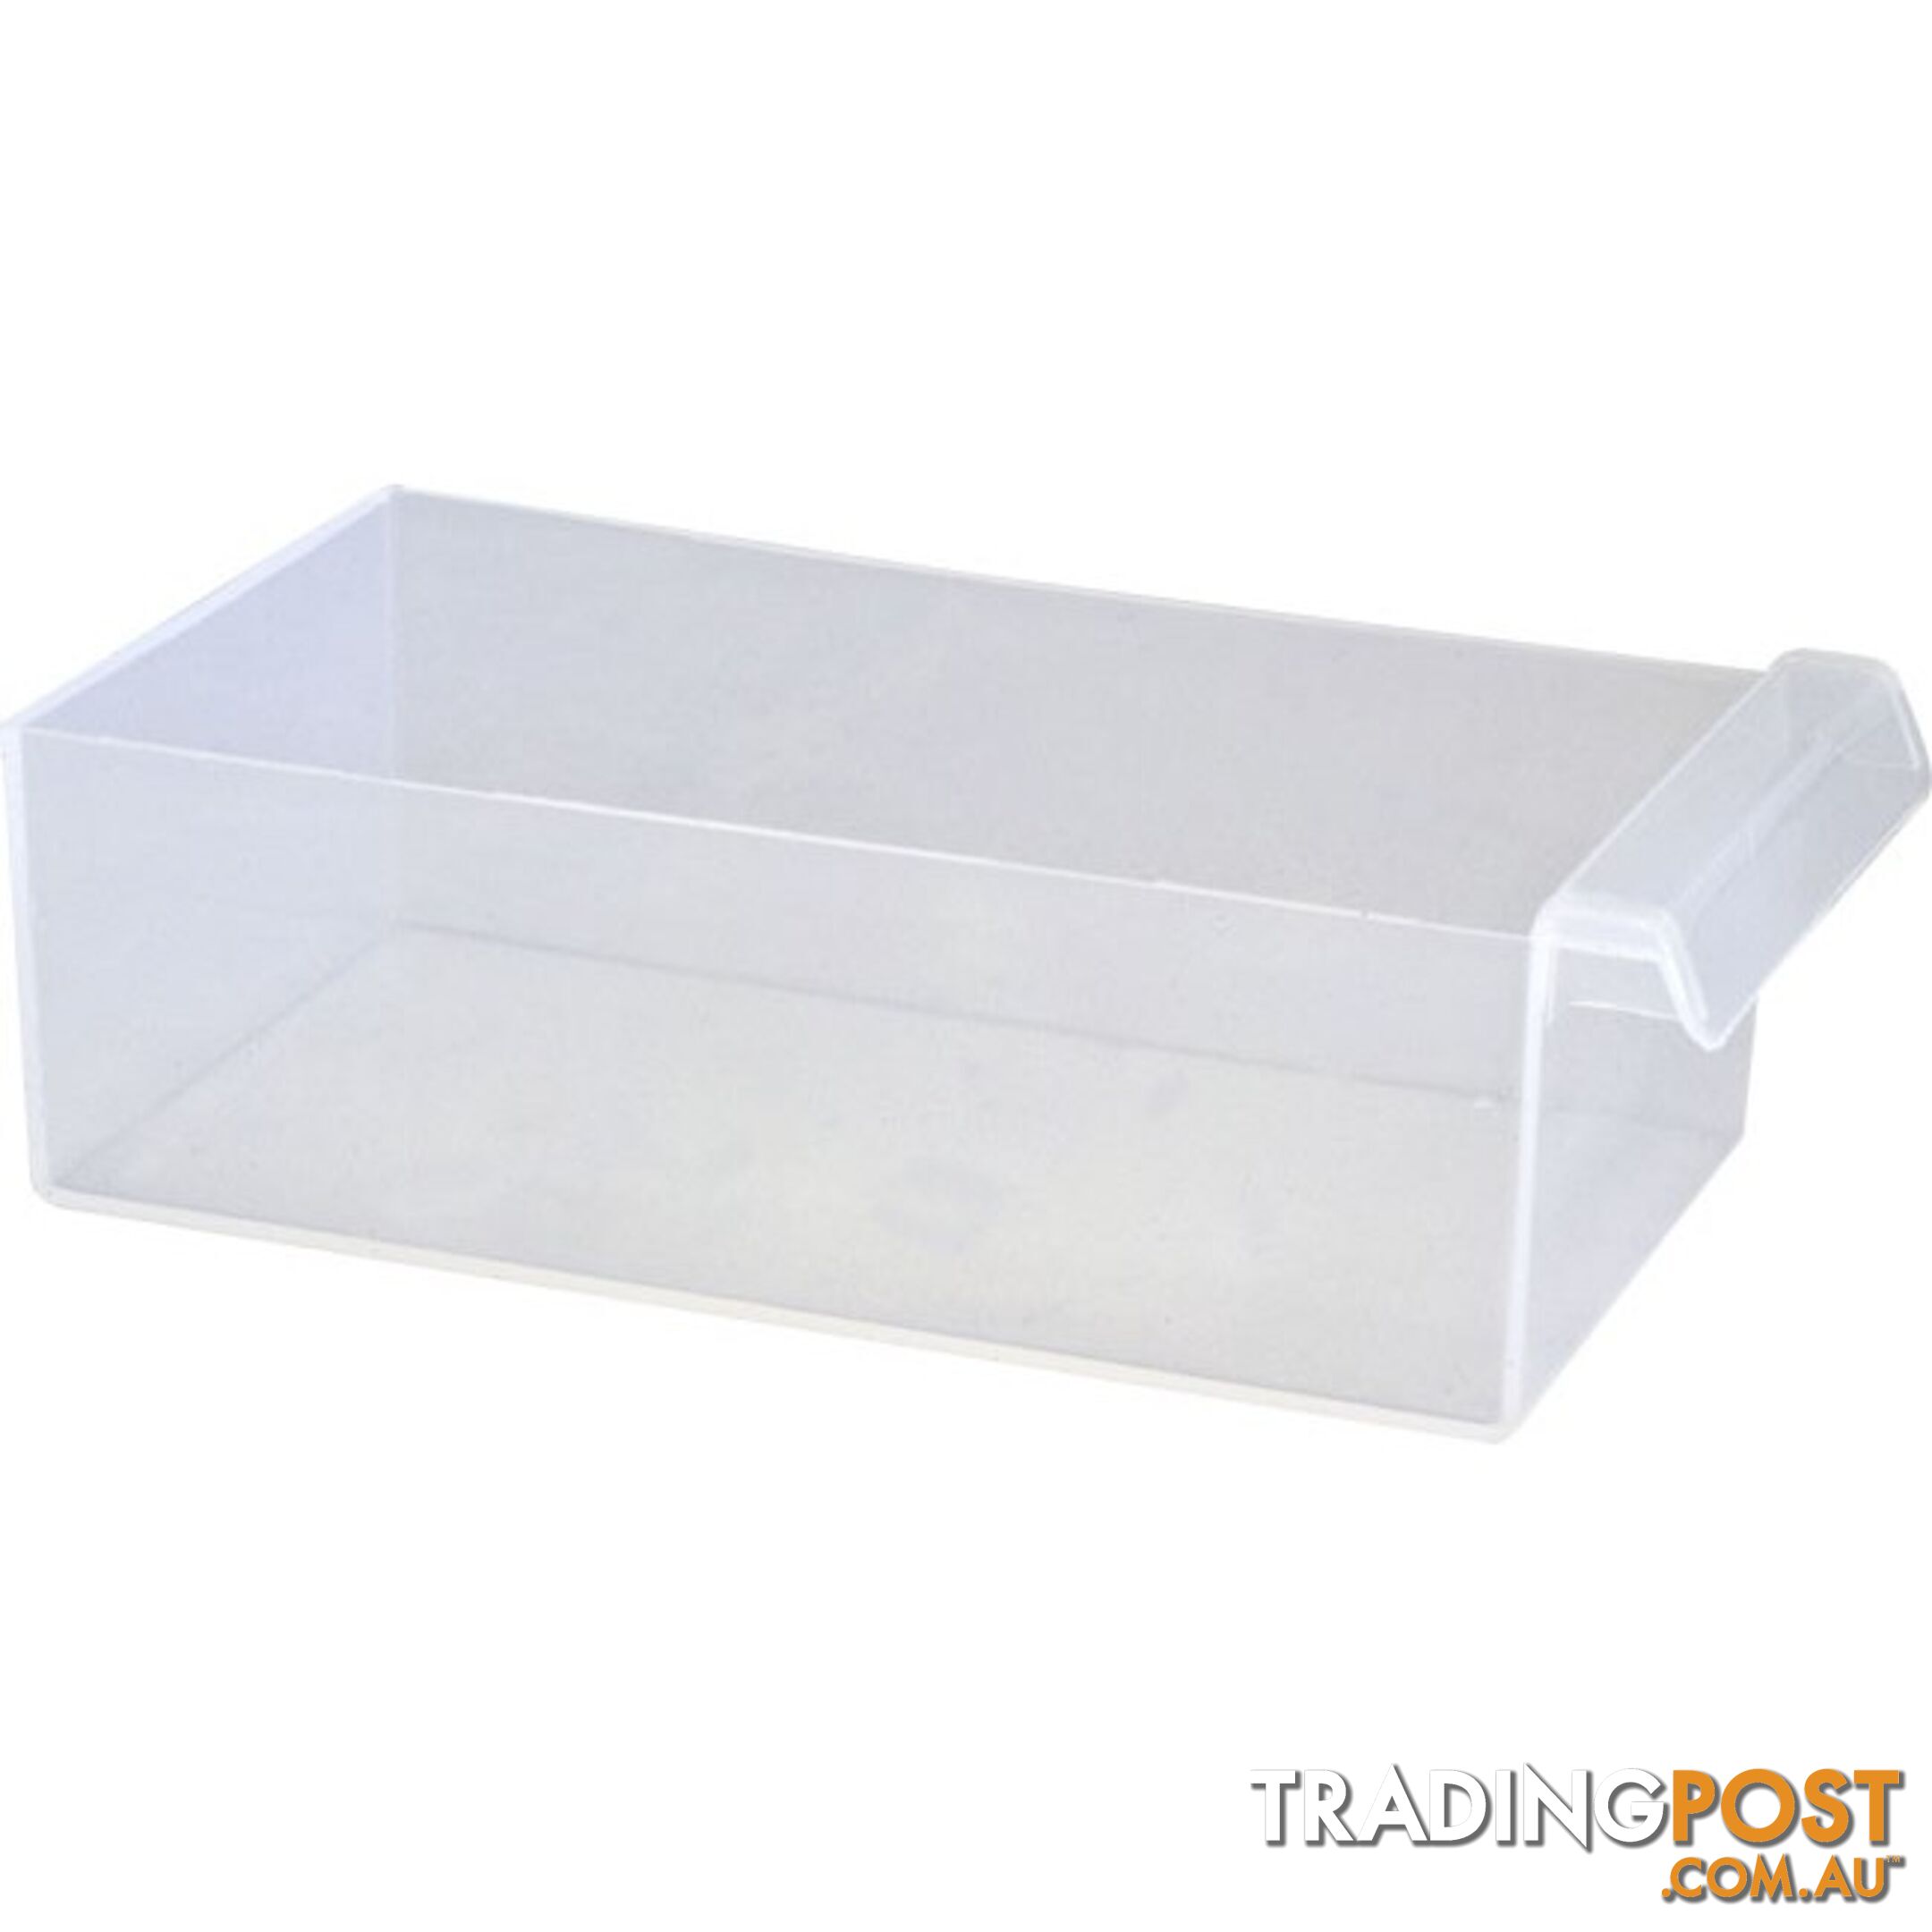 1H046 DRAWER ORGANISER INSERTS FOR 1H050 (12)AND 1H051 (20)BOX